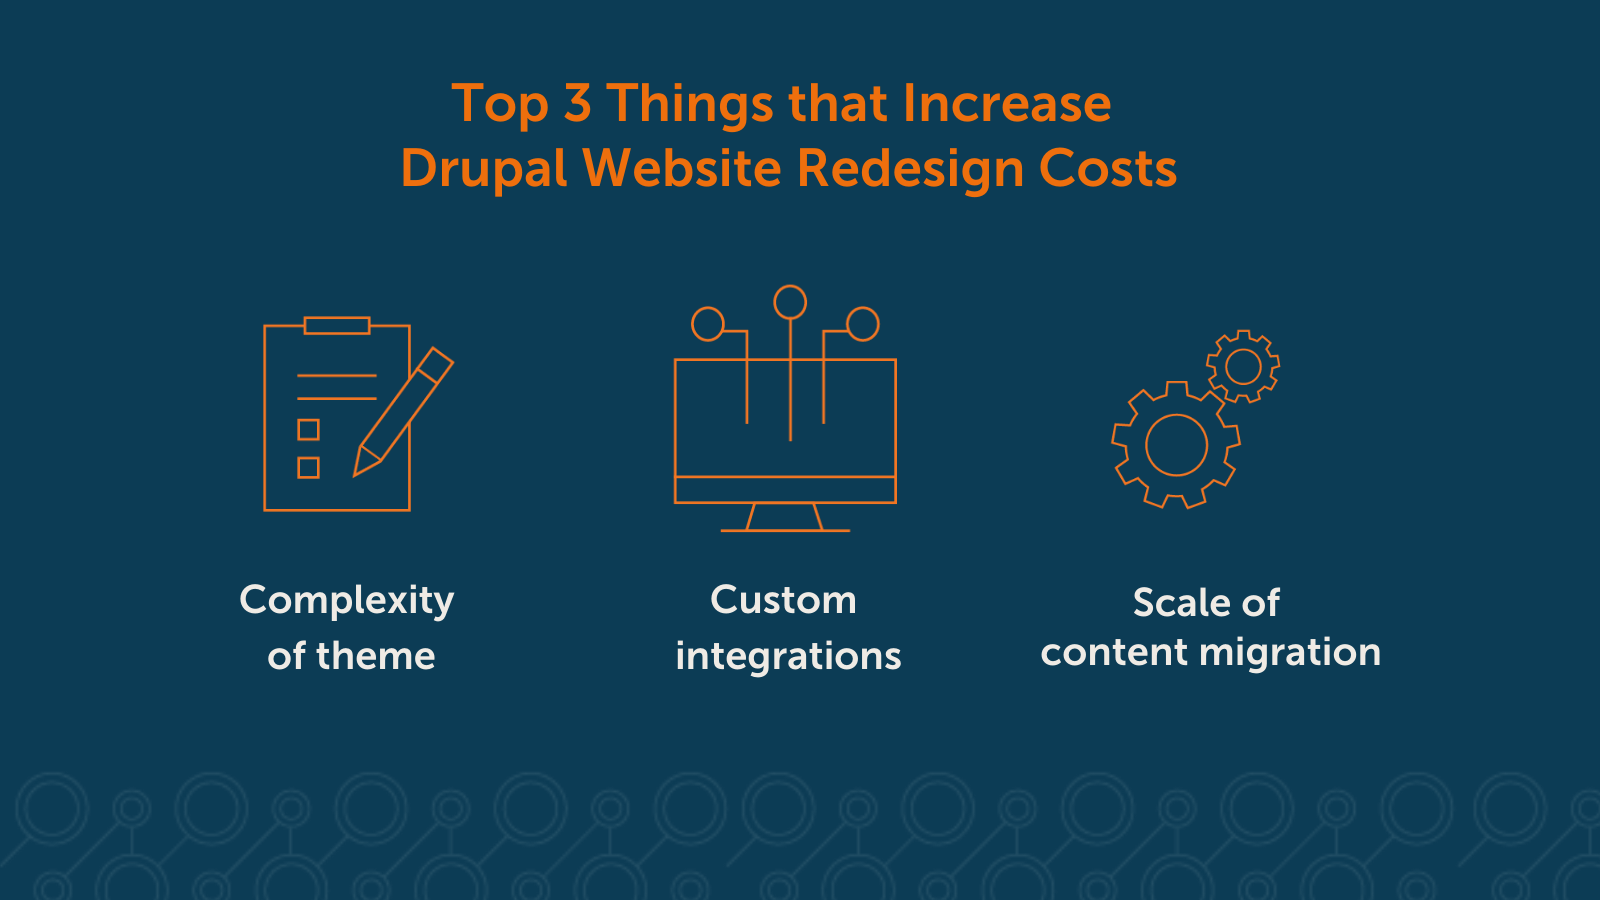 Graphic showing the 3 top factors that can influence the cost of a Drupal redesign